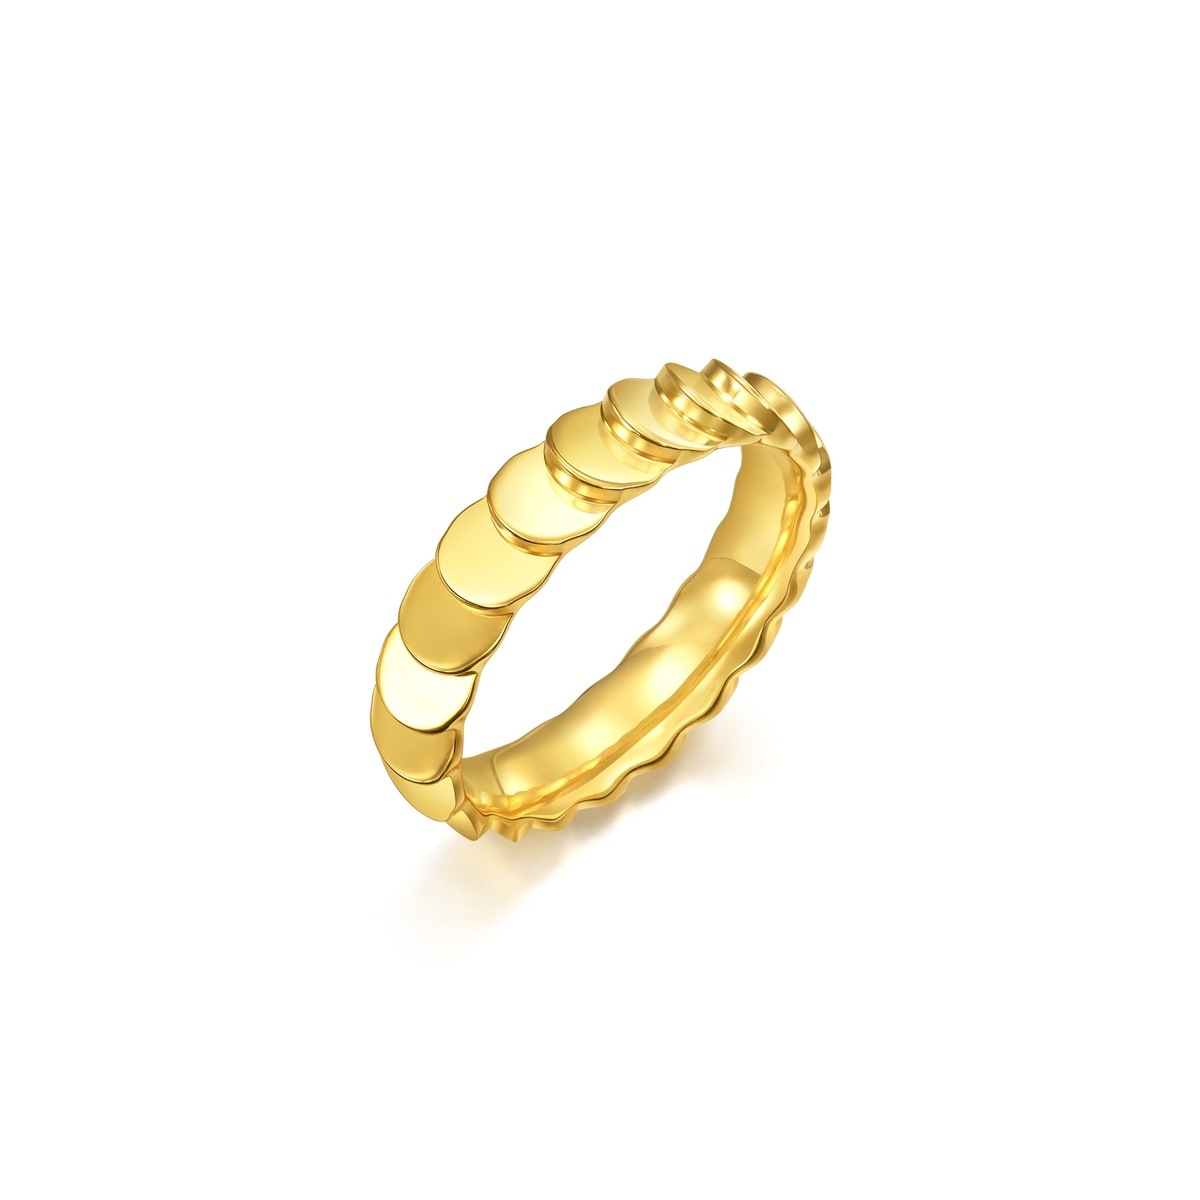 Mirror Gold 999 Gold Ring - 94290R | Chow Sang Sang Jewellery